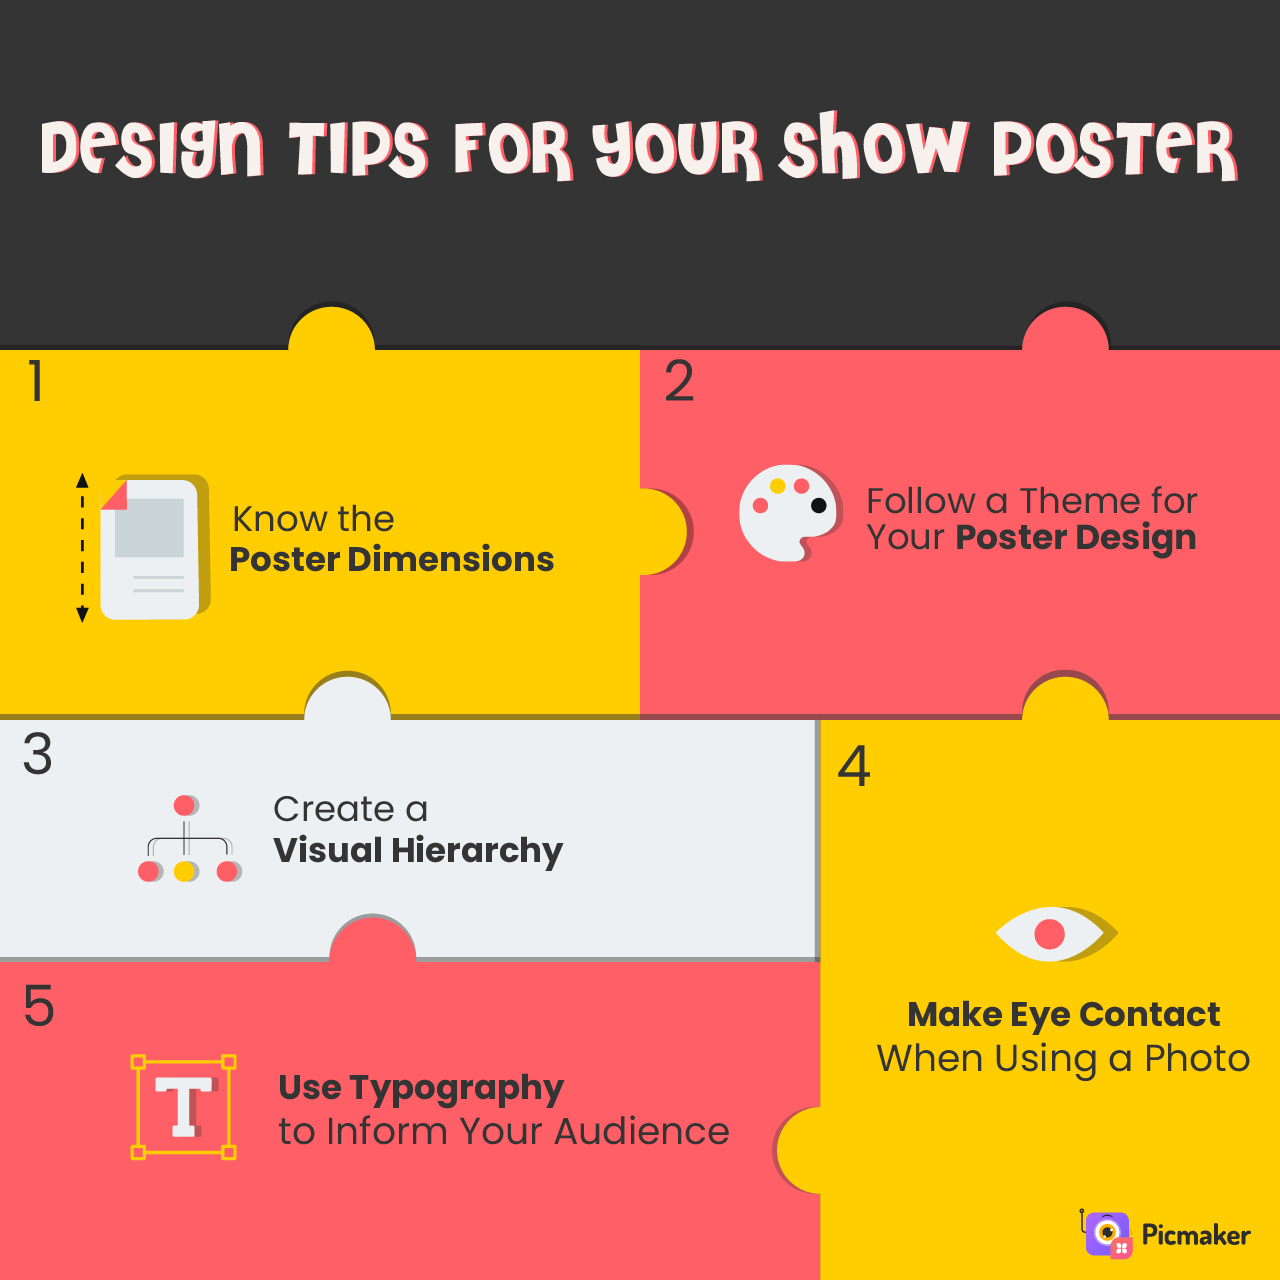 Design tips for show poster